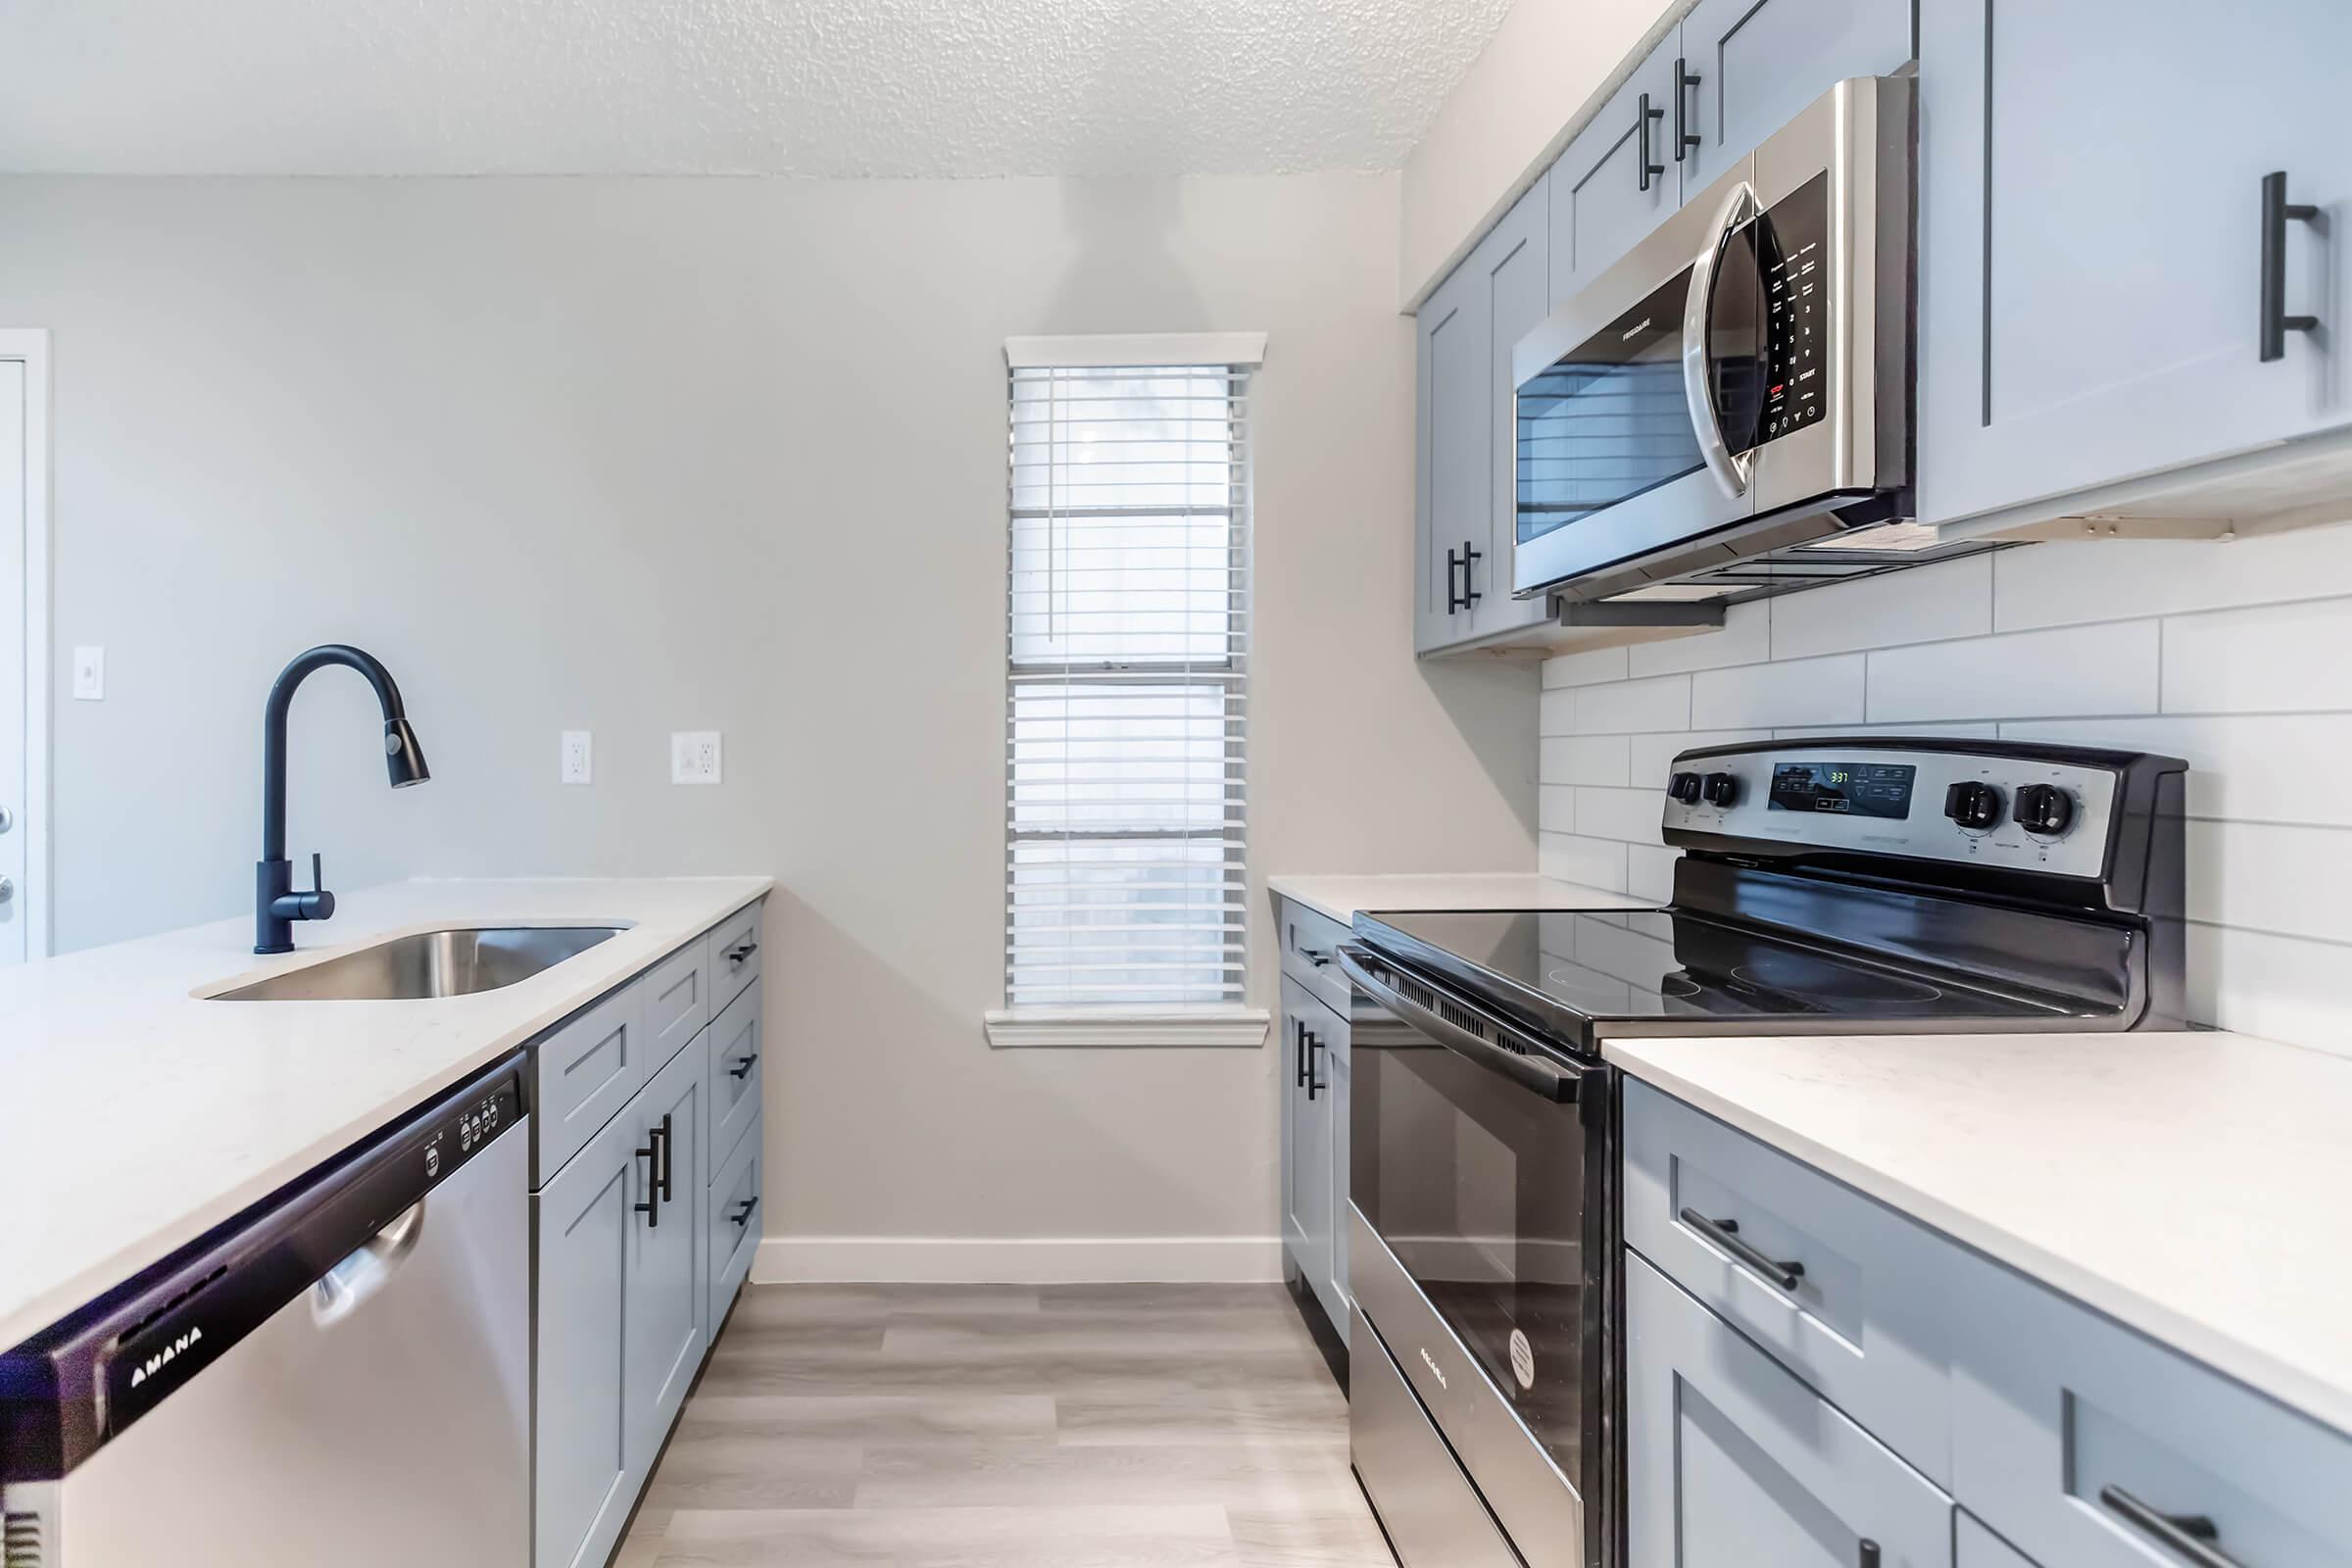 Apartment kitchen with stove, microwave, sink, dishwasher, and washer/dryer in Bedford, TX